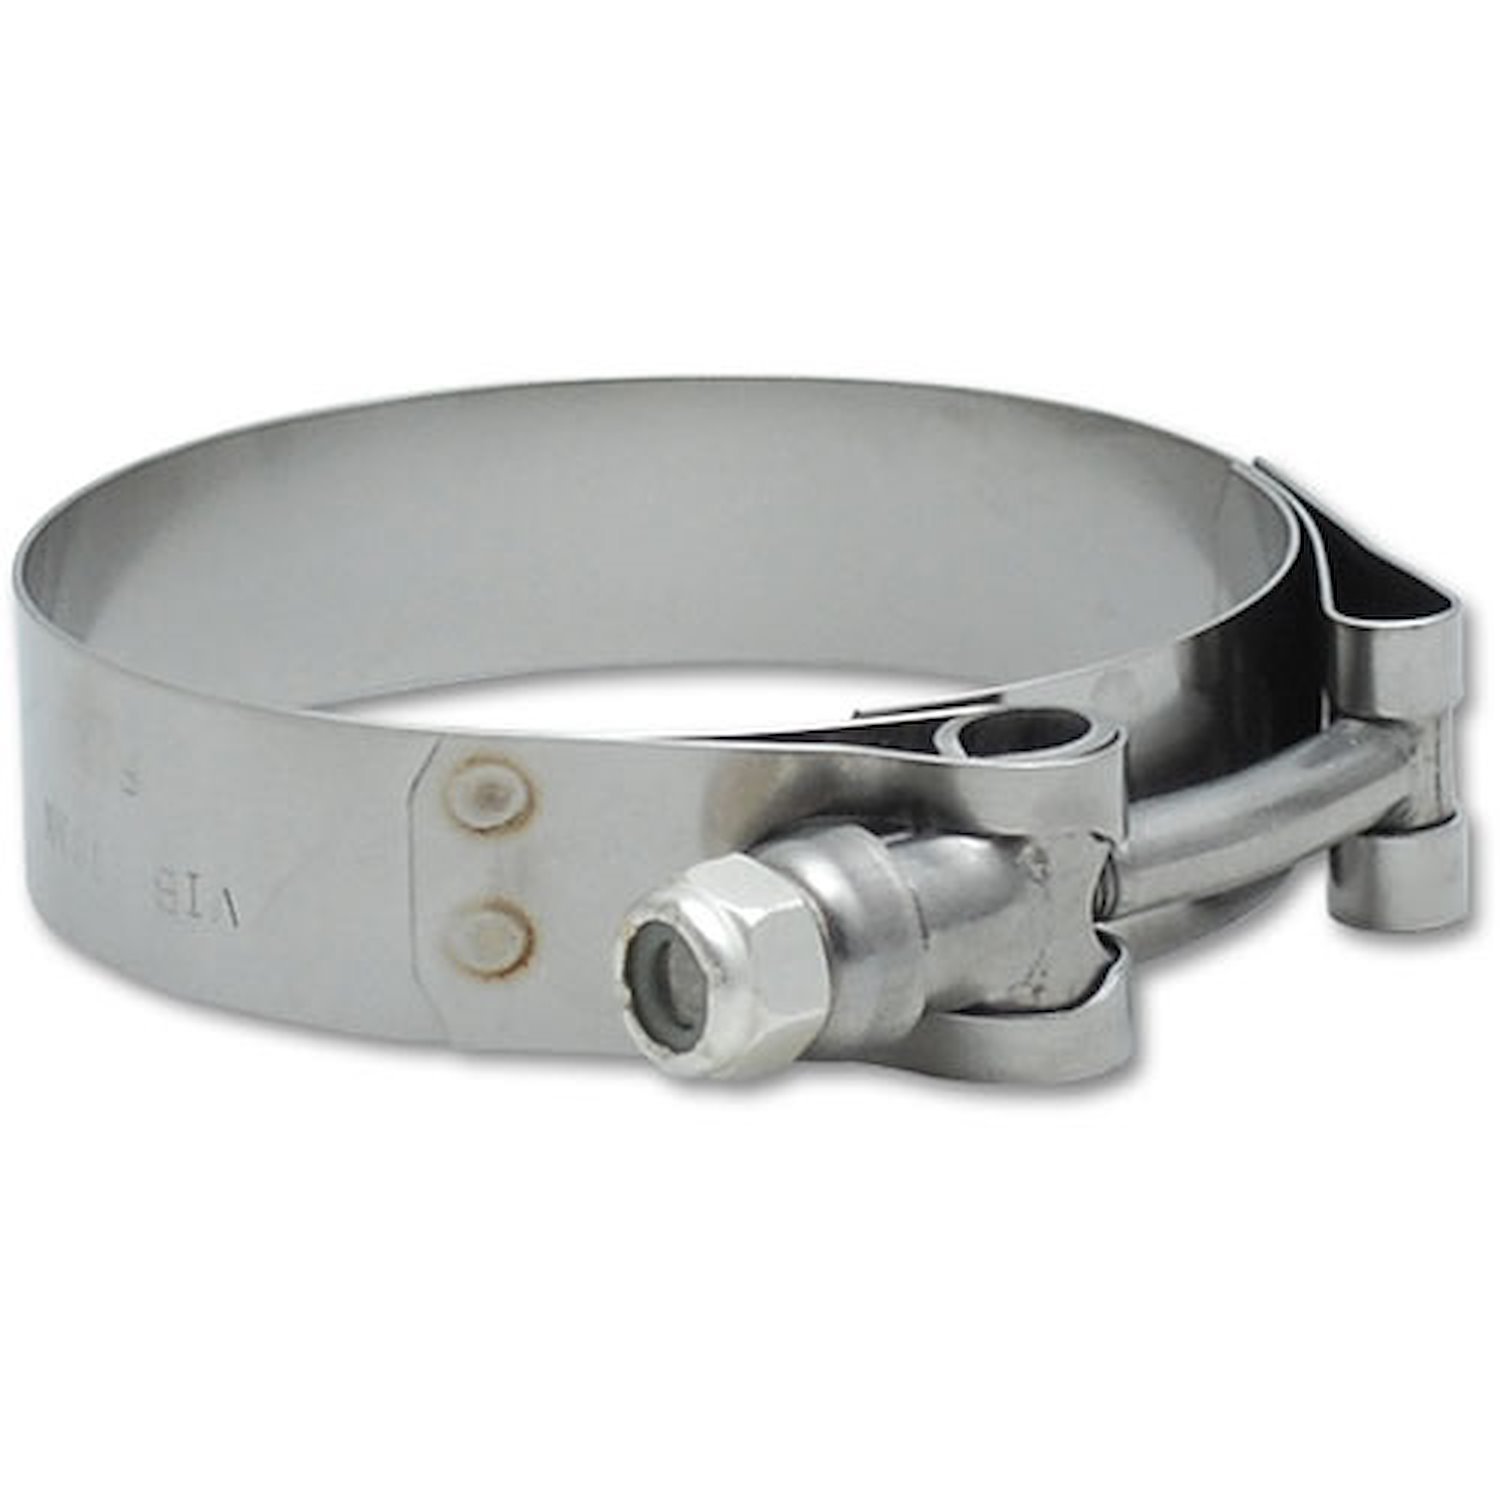 Stainless Steel T-Bolt Clamps Clamp Range 2.75